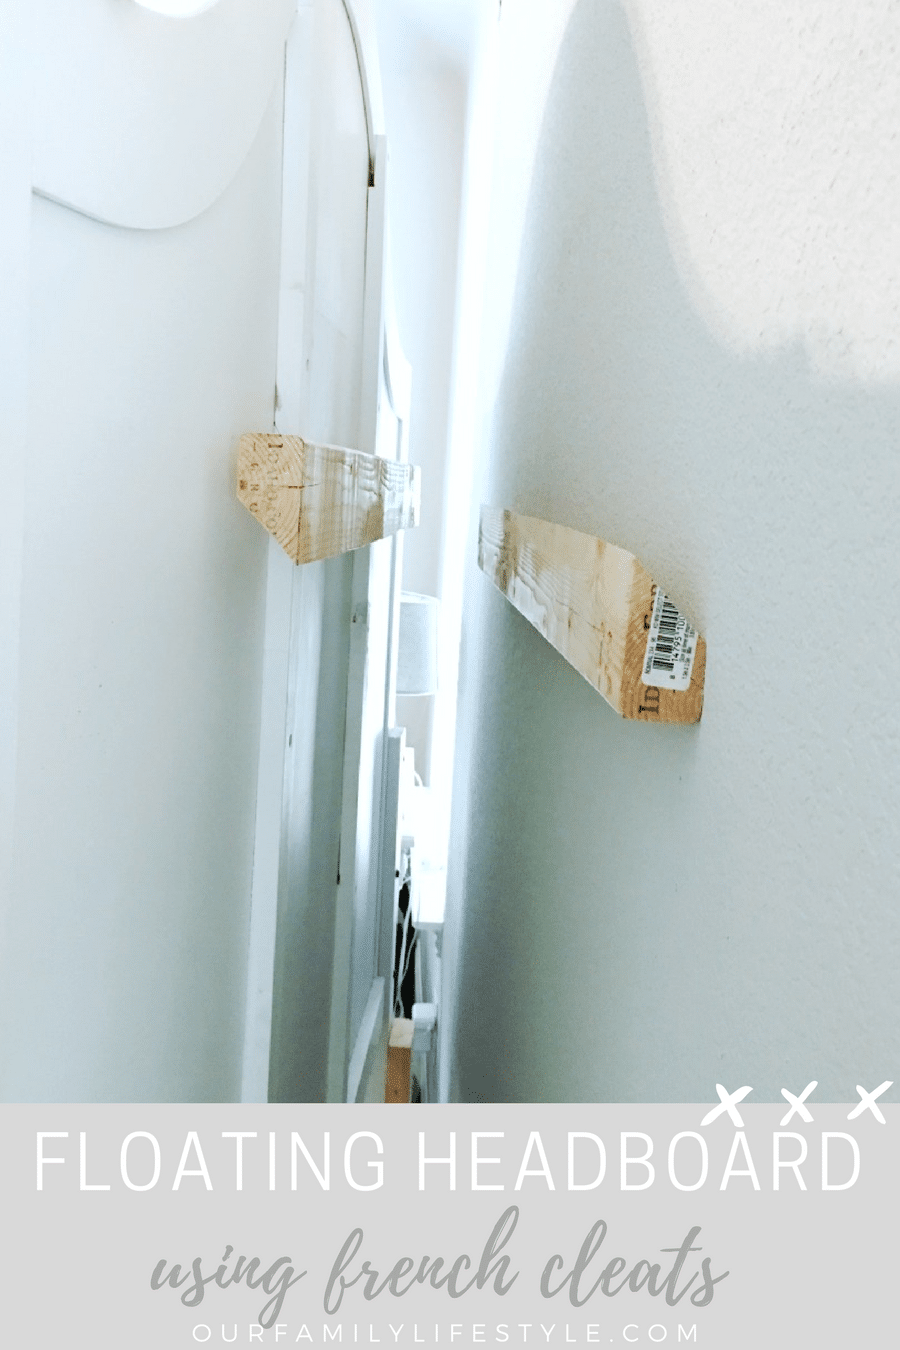 Headboard To The Wall Using French Cleats, How To Fix A Headboard The Wall